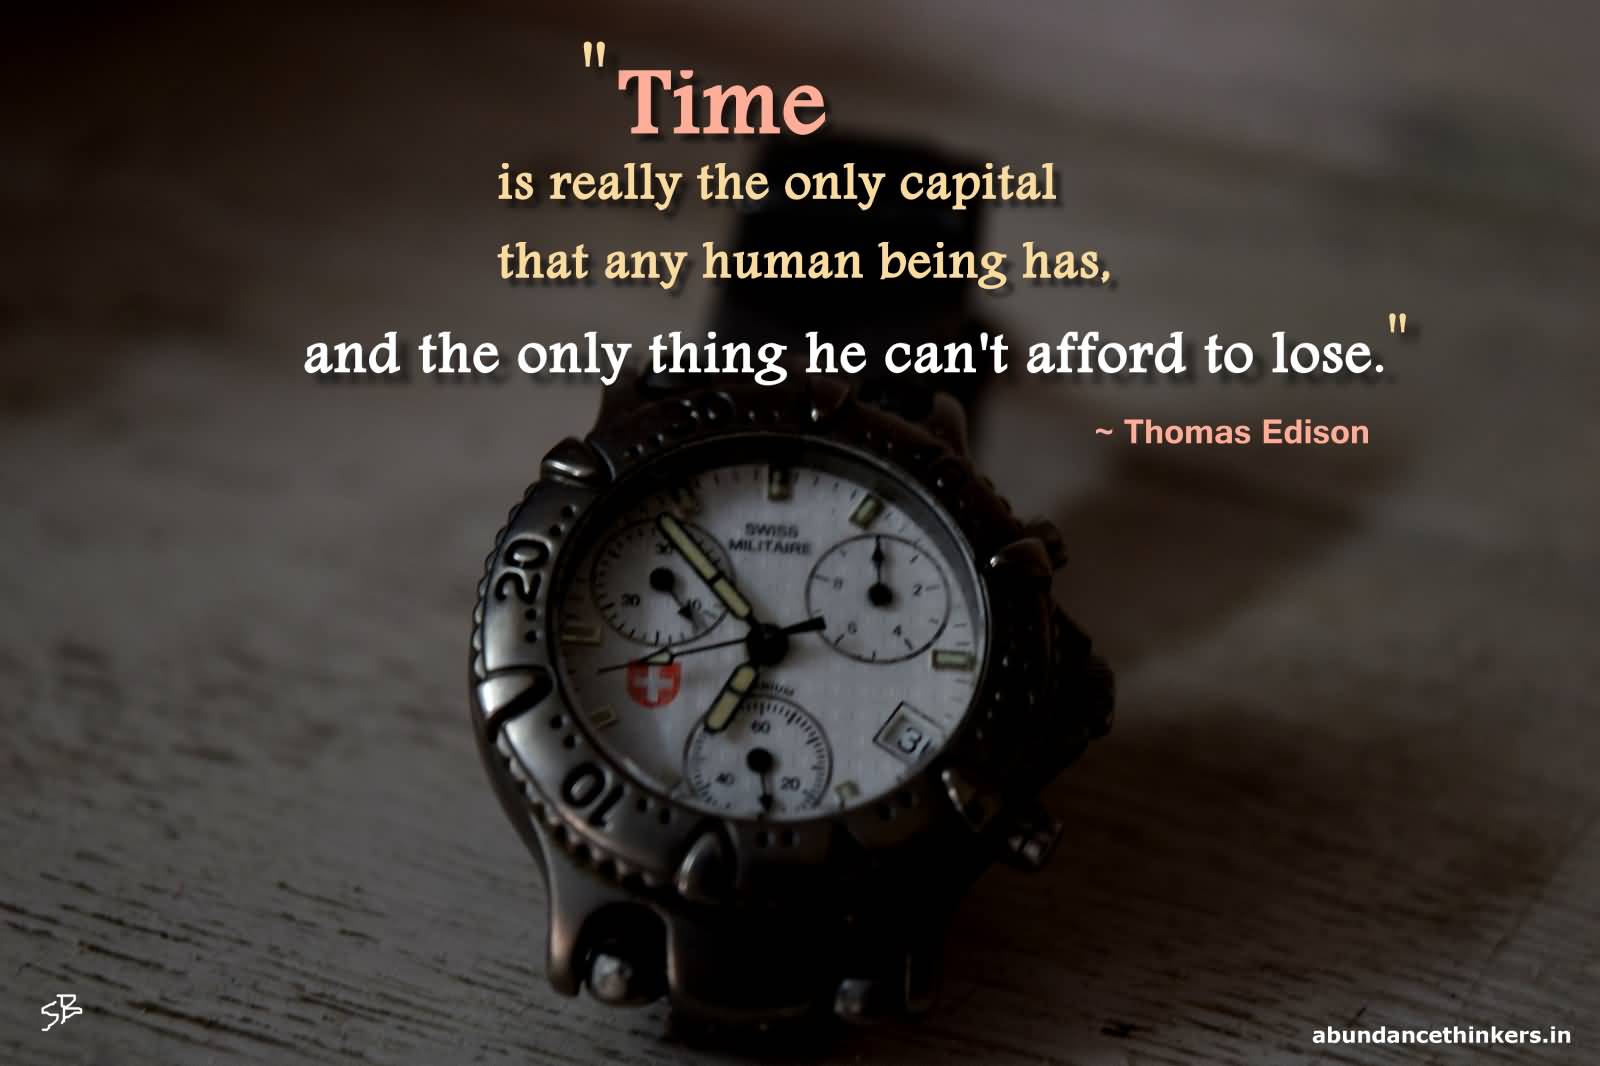 Time is really the only capital that any human being has, and the only thing he can't afford to lose. Thomas Edison